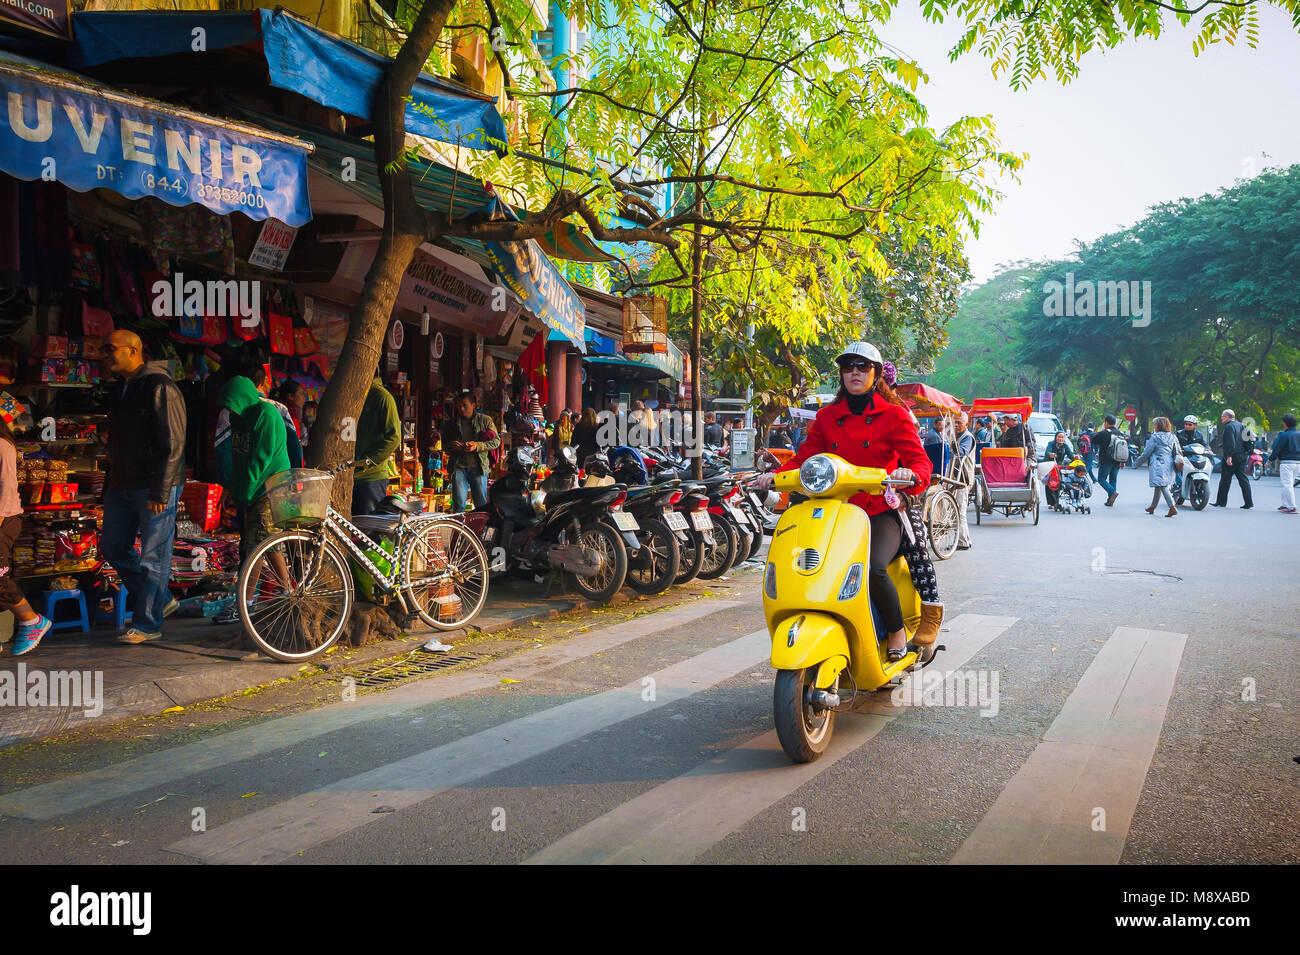 Vietnam scooter, view of a young Vietnamese woman riding a yellow scooter into the Old Quarter in the center of Hanoi, Vietnam. Stock Photo